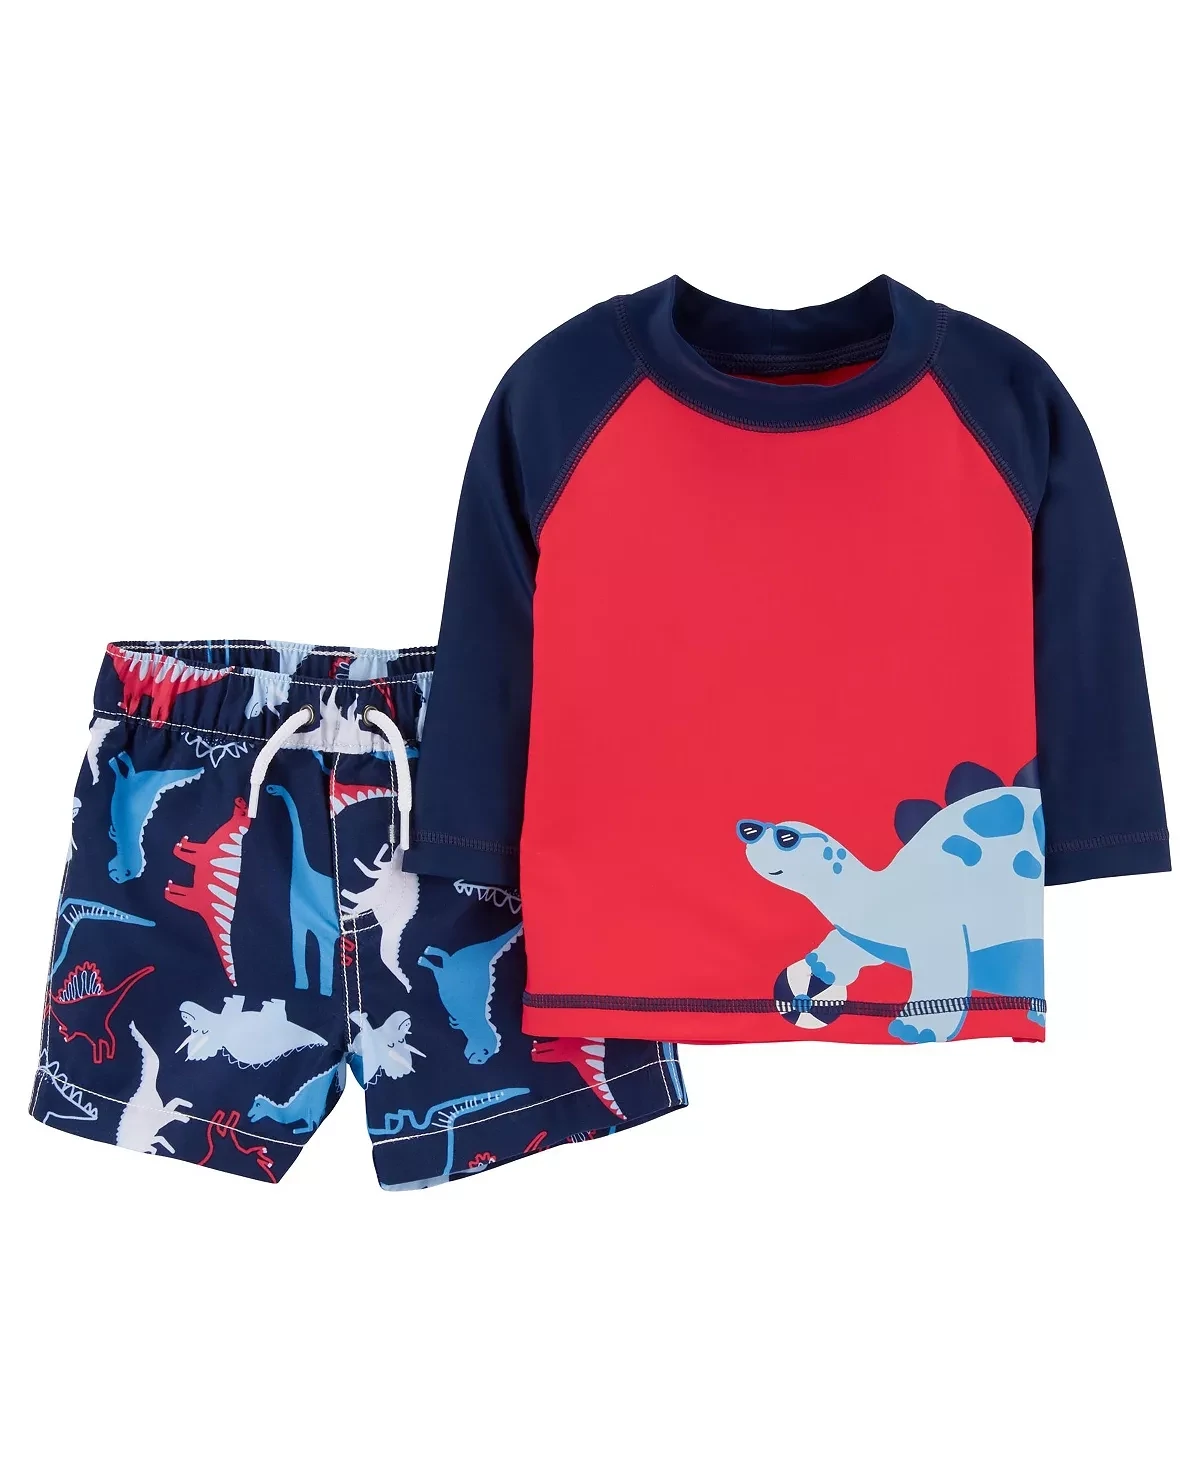 Carter's Baby Boys Rashguard and Swim Trunk Set - Red, Size 9 Months